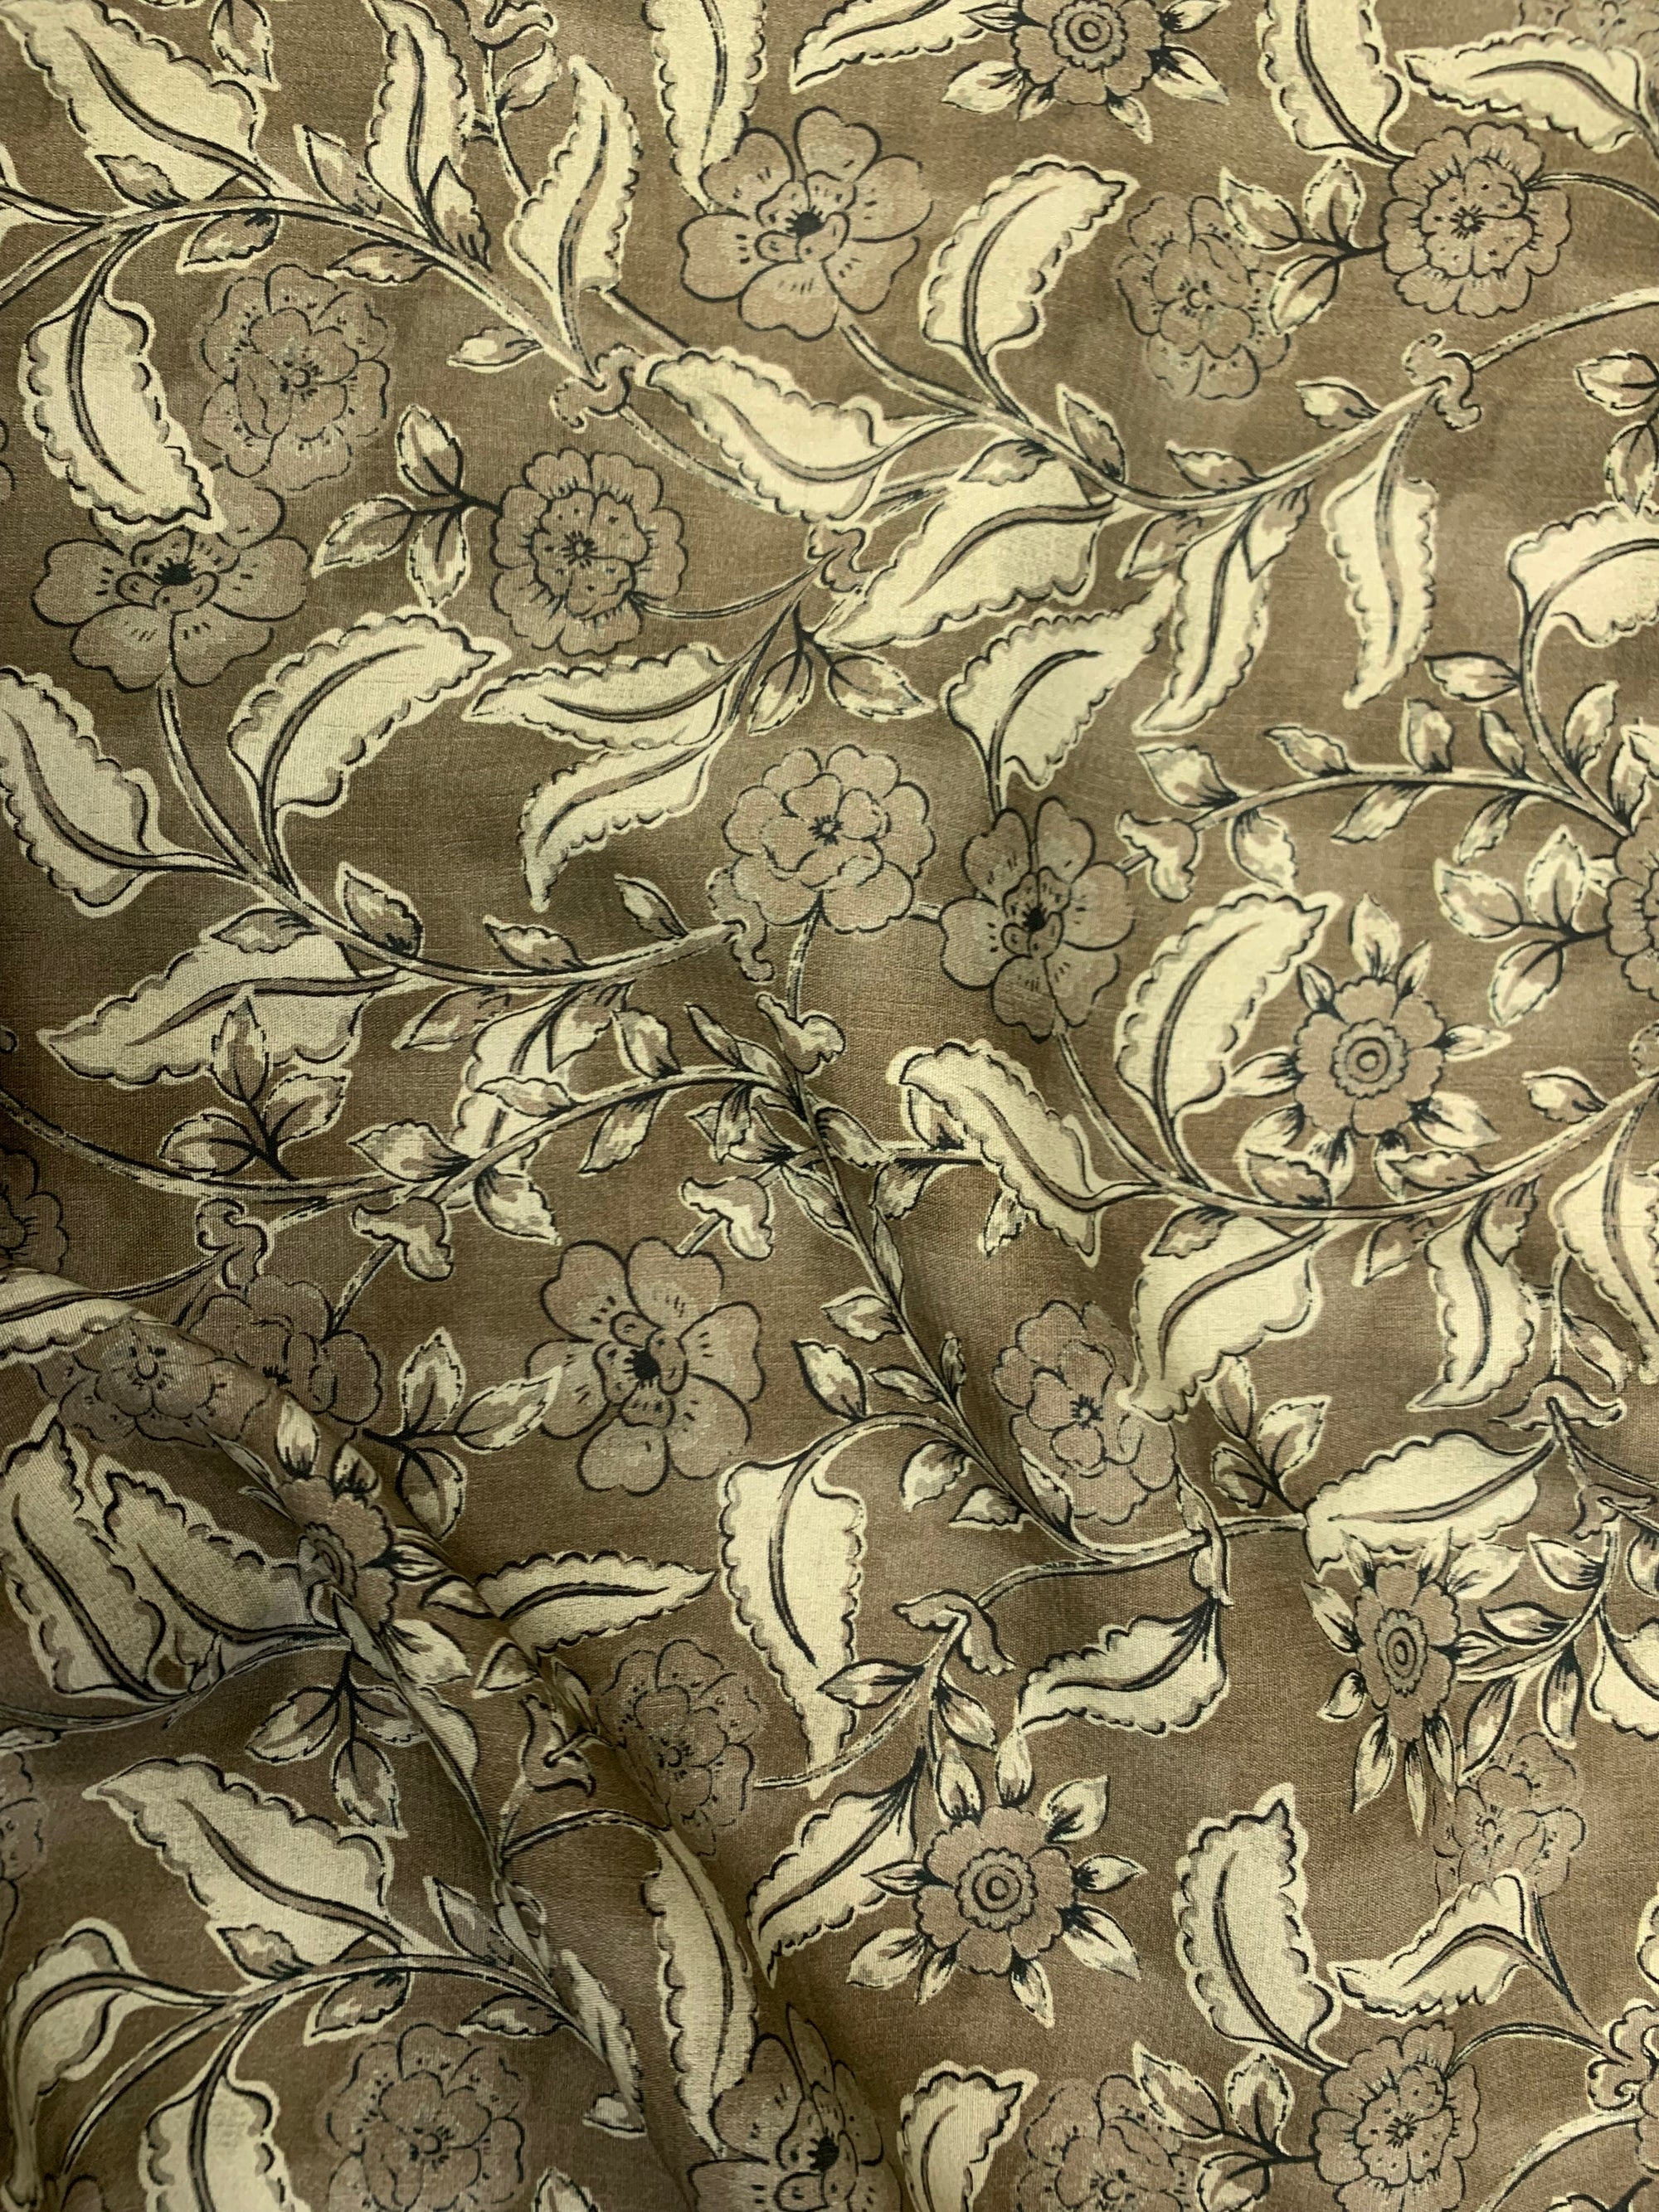 Viscose challis fabric in a Vintage Olive/Taupe floral print.